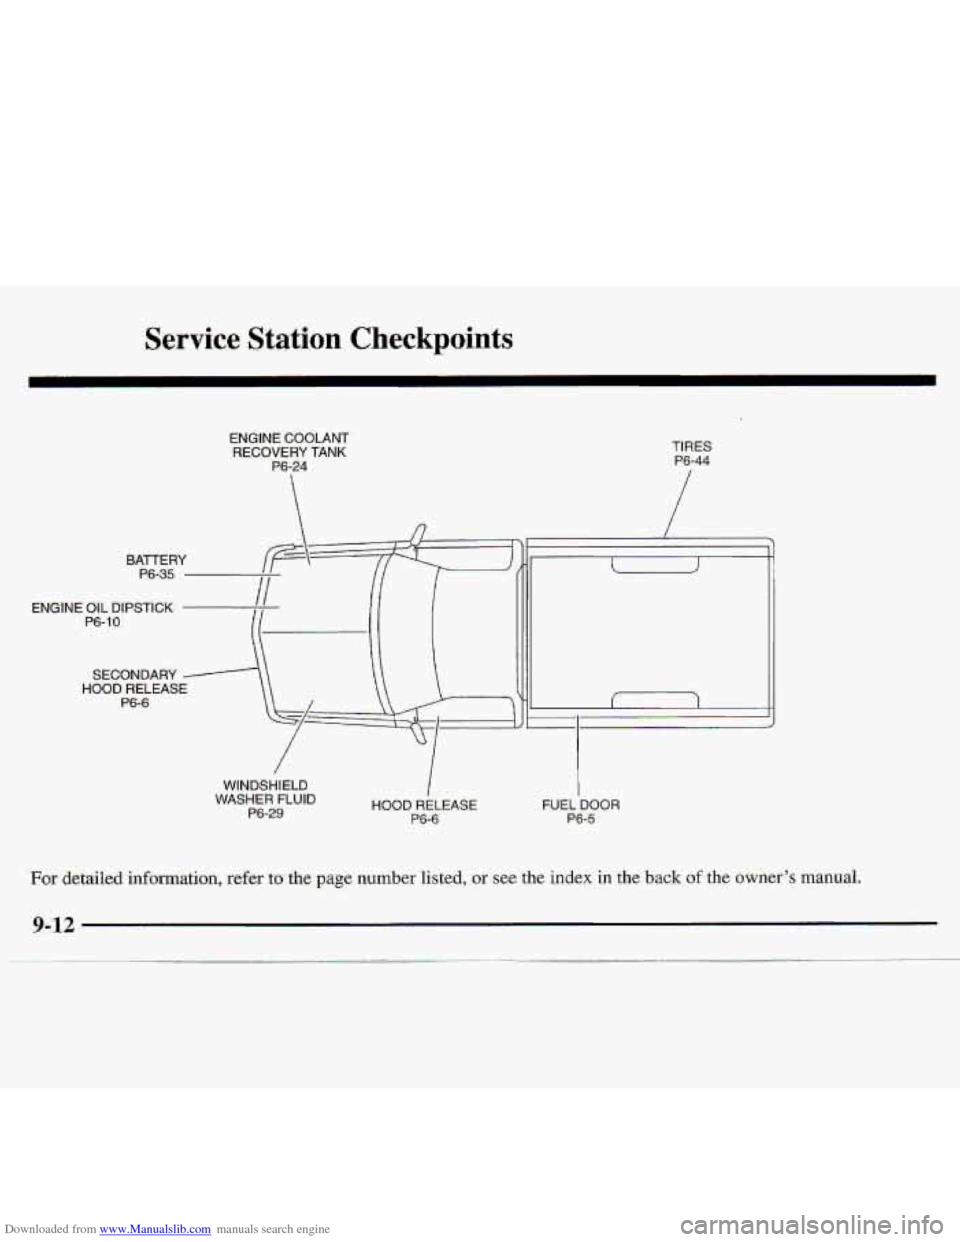 CHEVROLET S10 1997 2.G Owners Manual Downloaded from www.Manualslib.com manuals search engine fl 
- ~. vic Station Checkpoints 
ENGINE COOLANT 
RECOVERY TANK 
P.6-24 
TIRES 
7 
BATfERY 
PS-35 
ENGiNE .O;IL DIPSTICK 
P6-10 
SECONDARY 
WIN